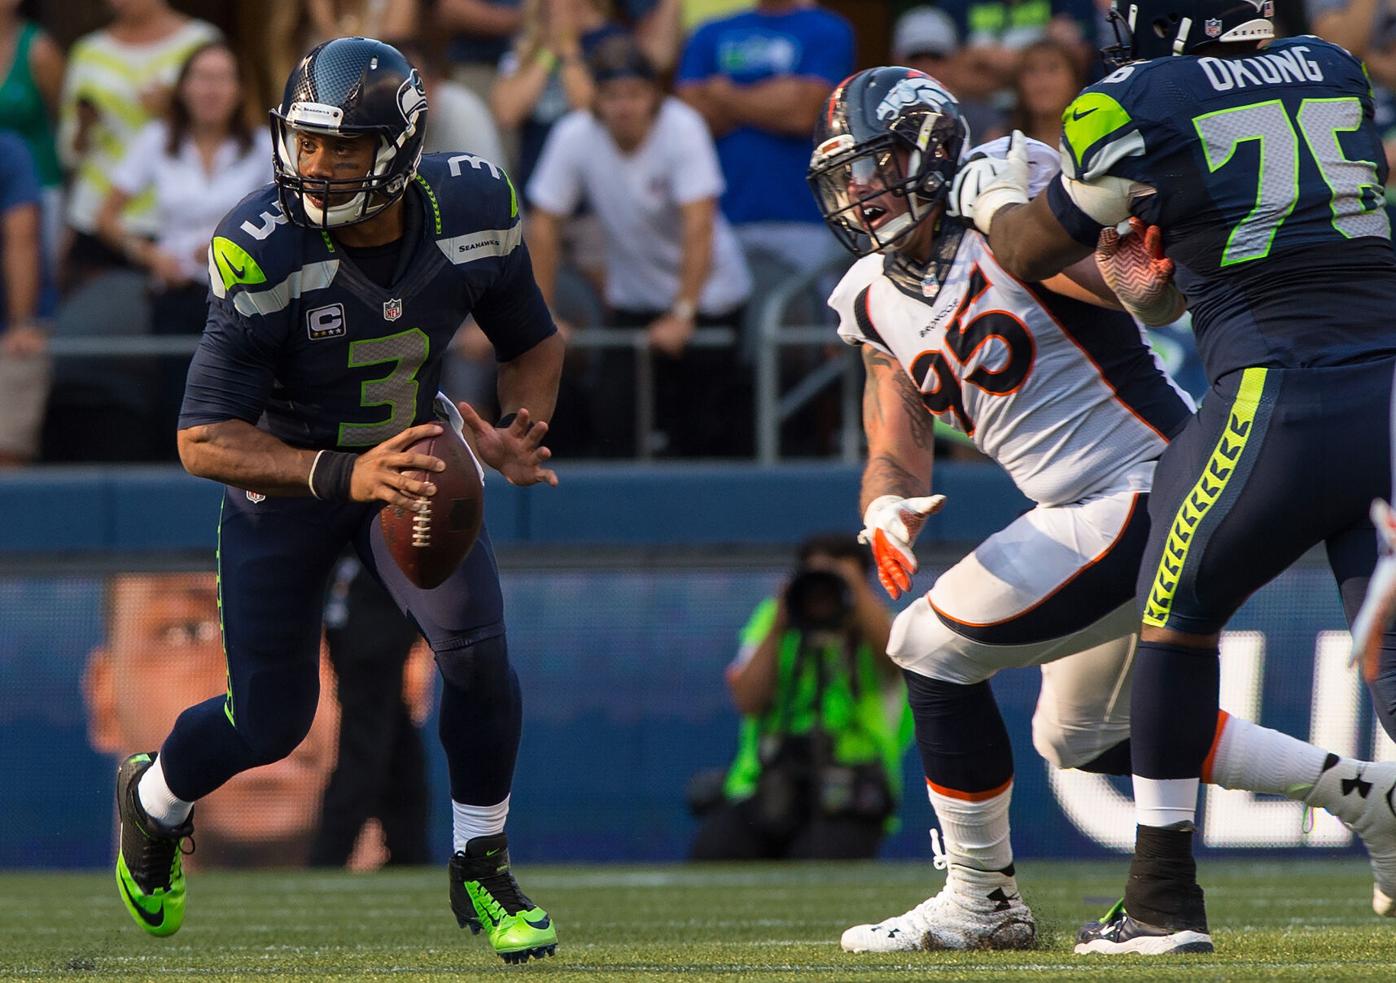 Woody Paige: Russell Wilson shows he's ready to saddle up with